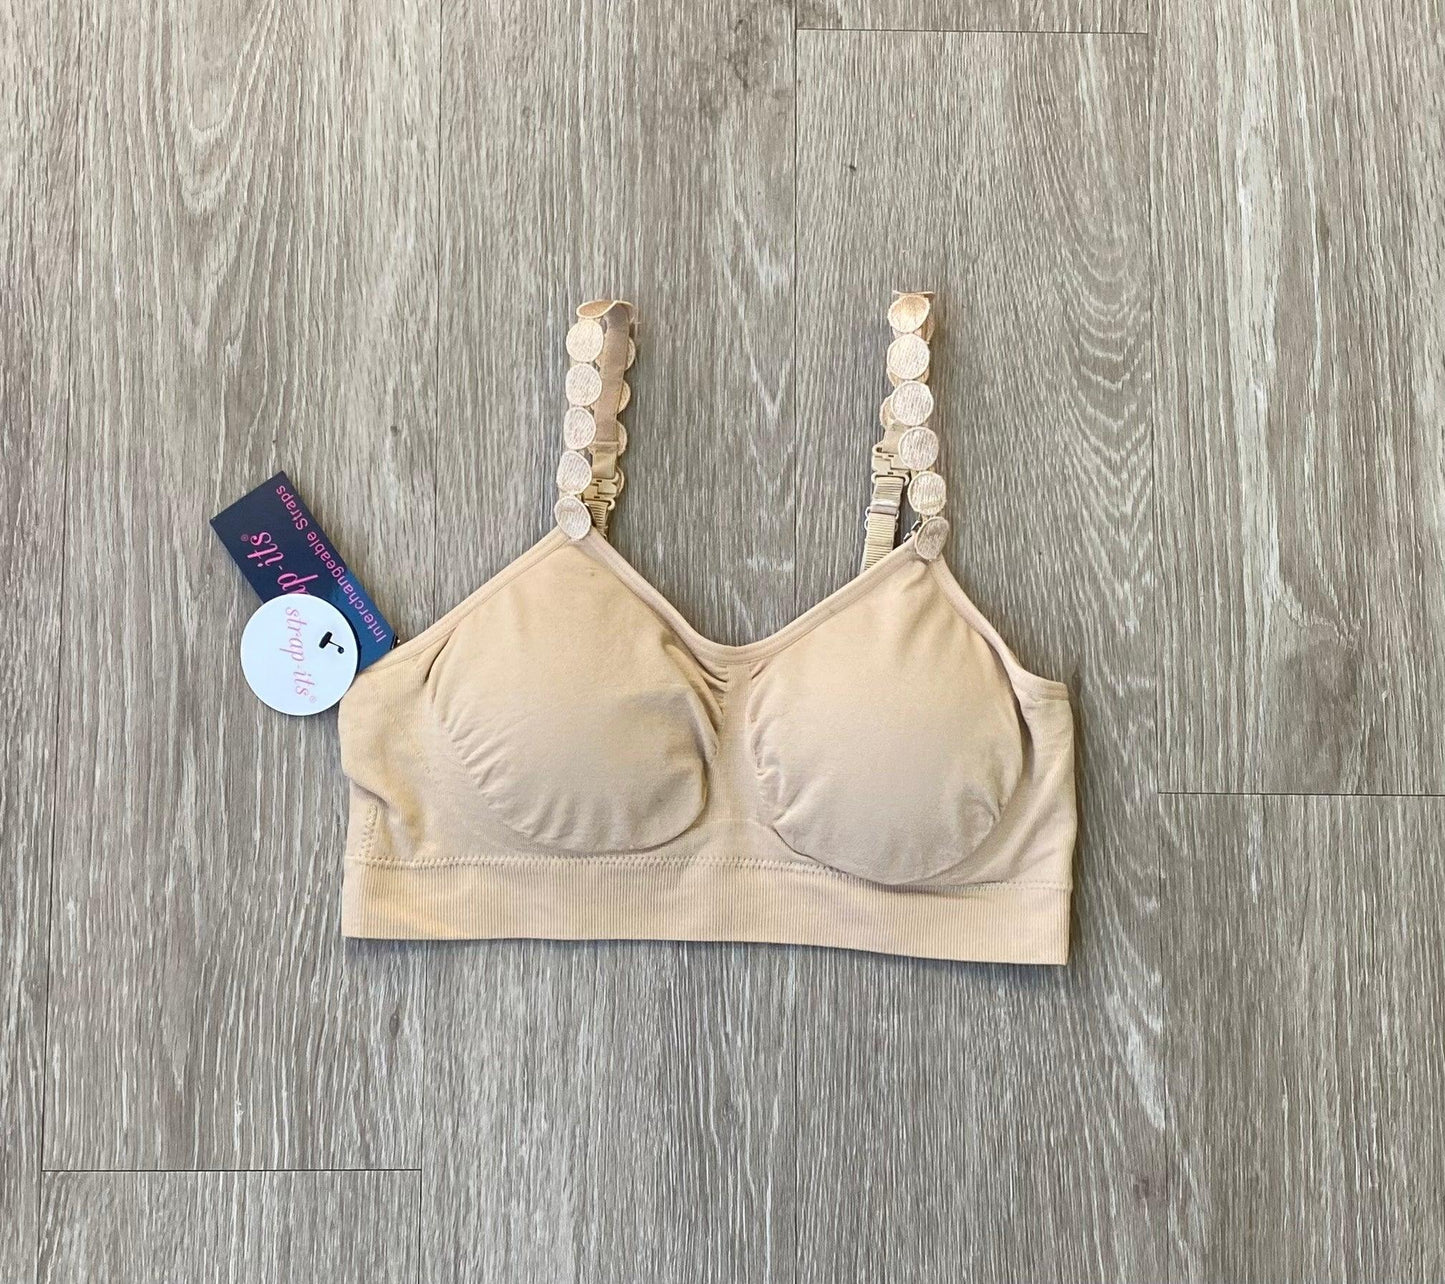 Strap-Its Bras - Strawberry Moon Boutique